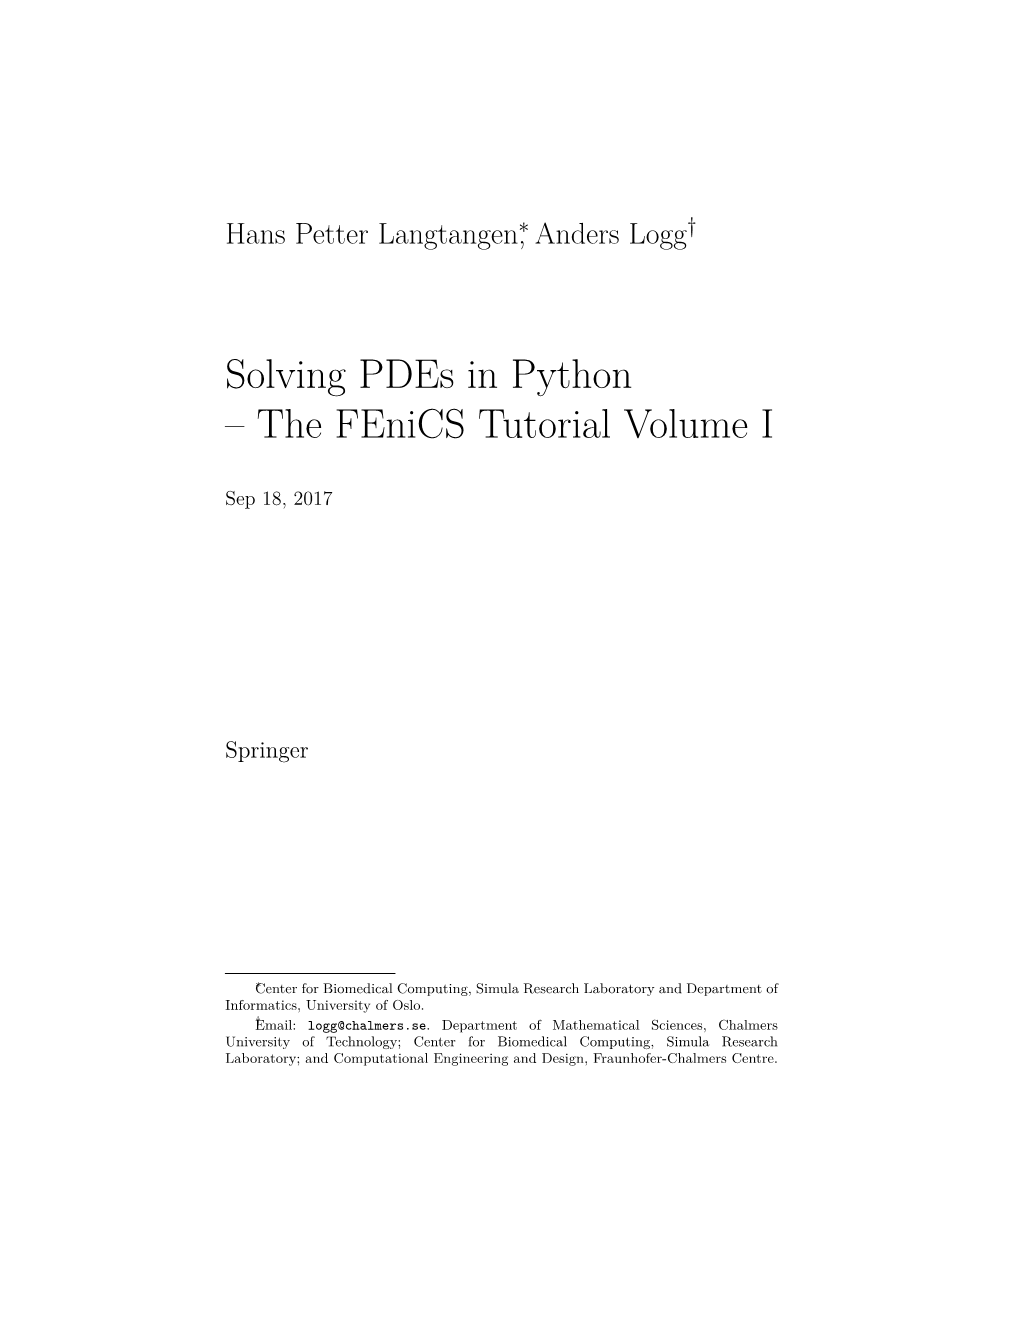 Solving Pdes in Python – the Fenics Tutorial Volume I